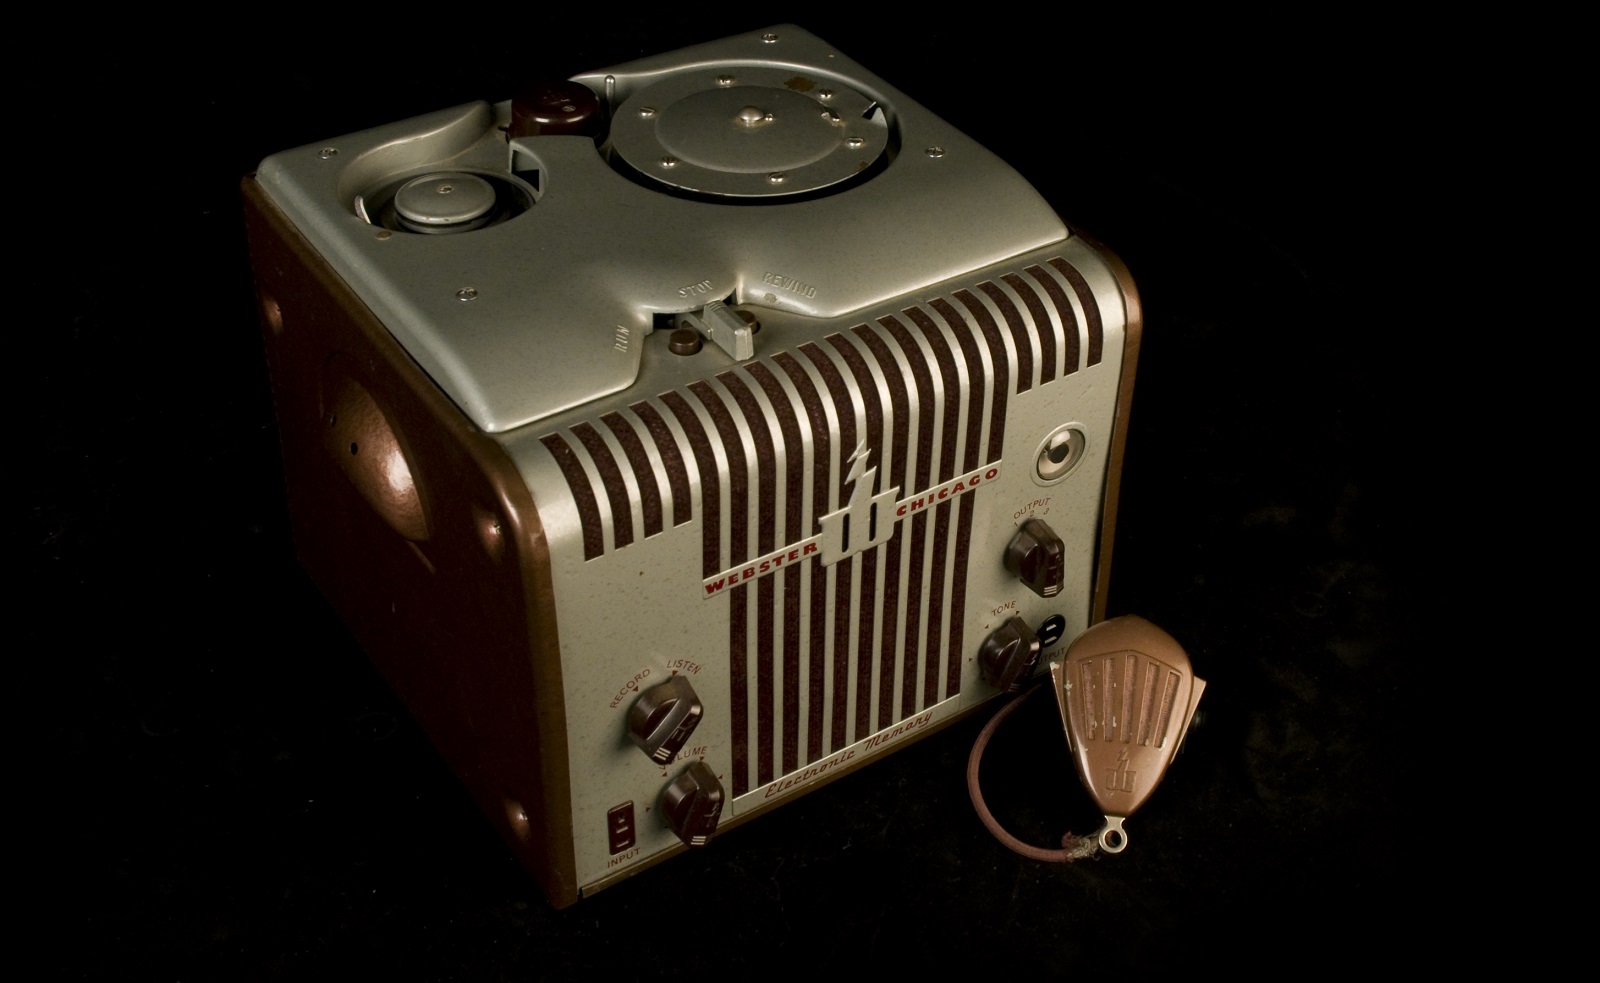 Webster Chicago 81-1 wire recorder made of sheet steel and microphone, manufactured 1951